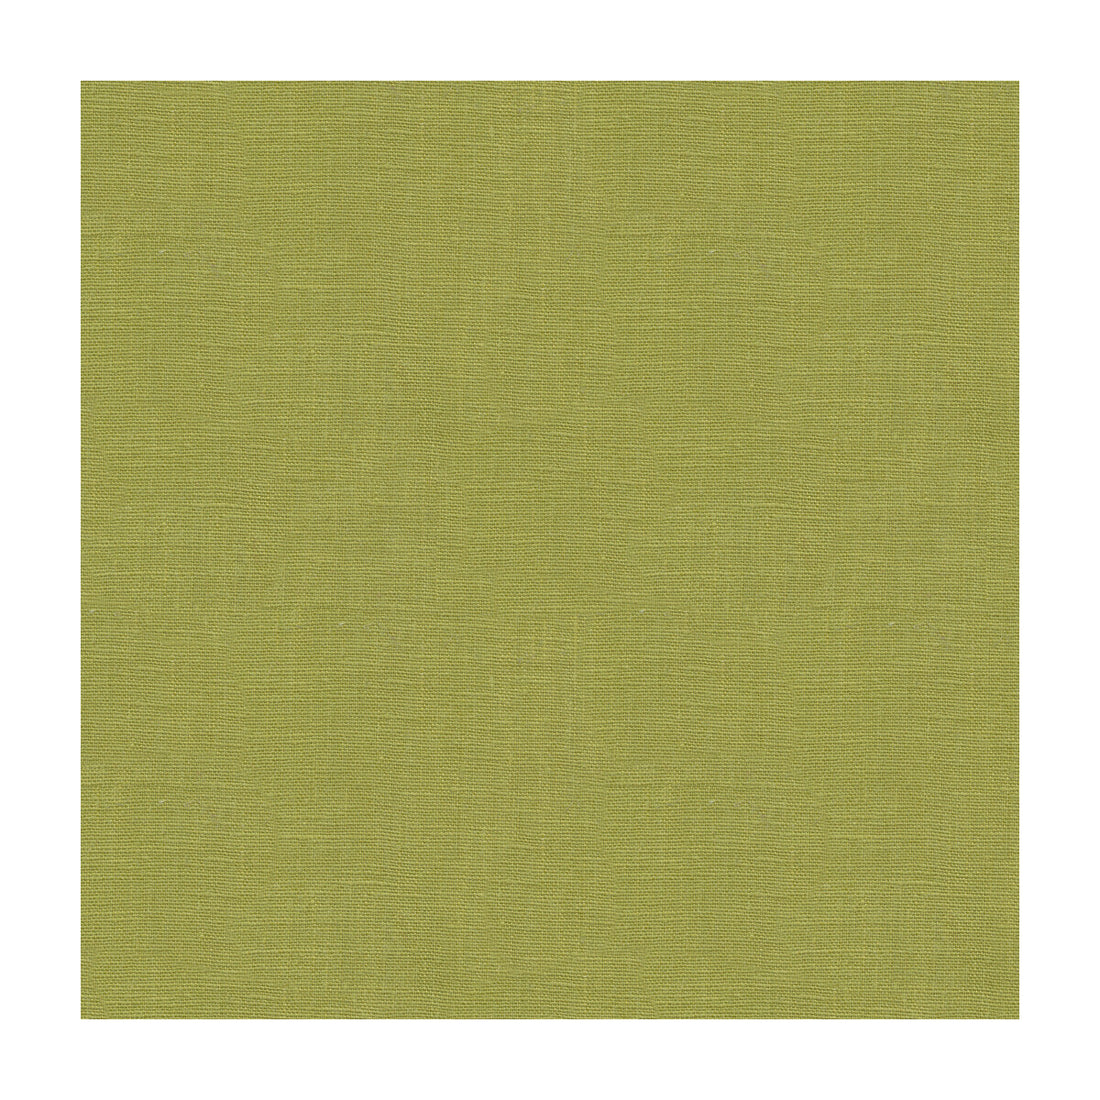 Dublin fabric in meadow color - pattern 32344.3.0 - by Kravet Basics in the Perfect Plains collection